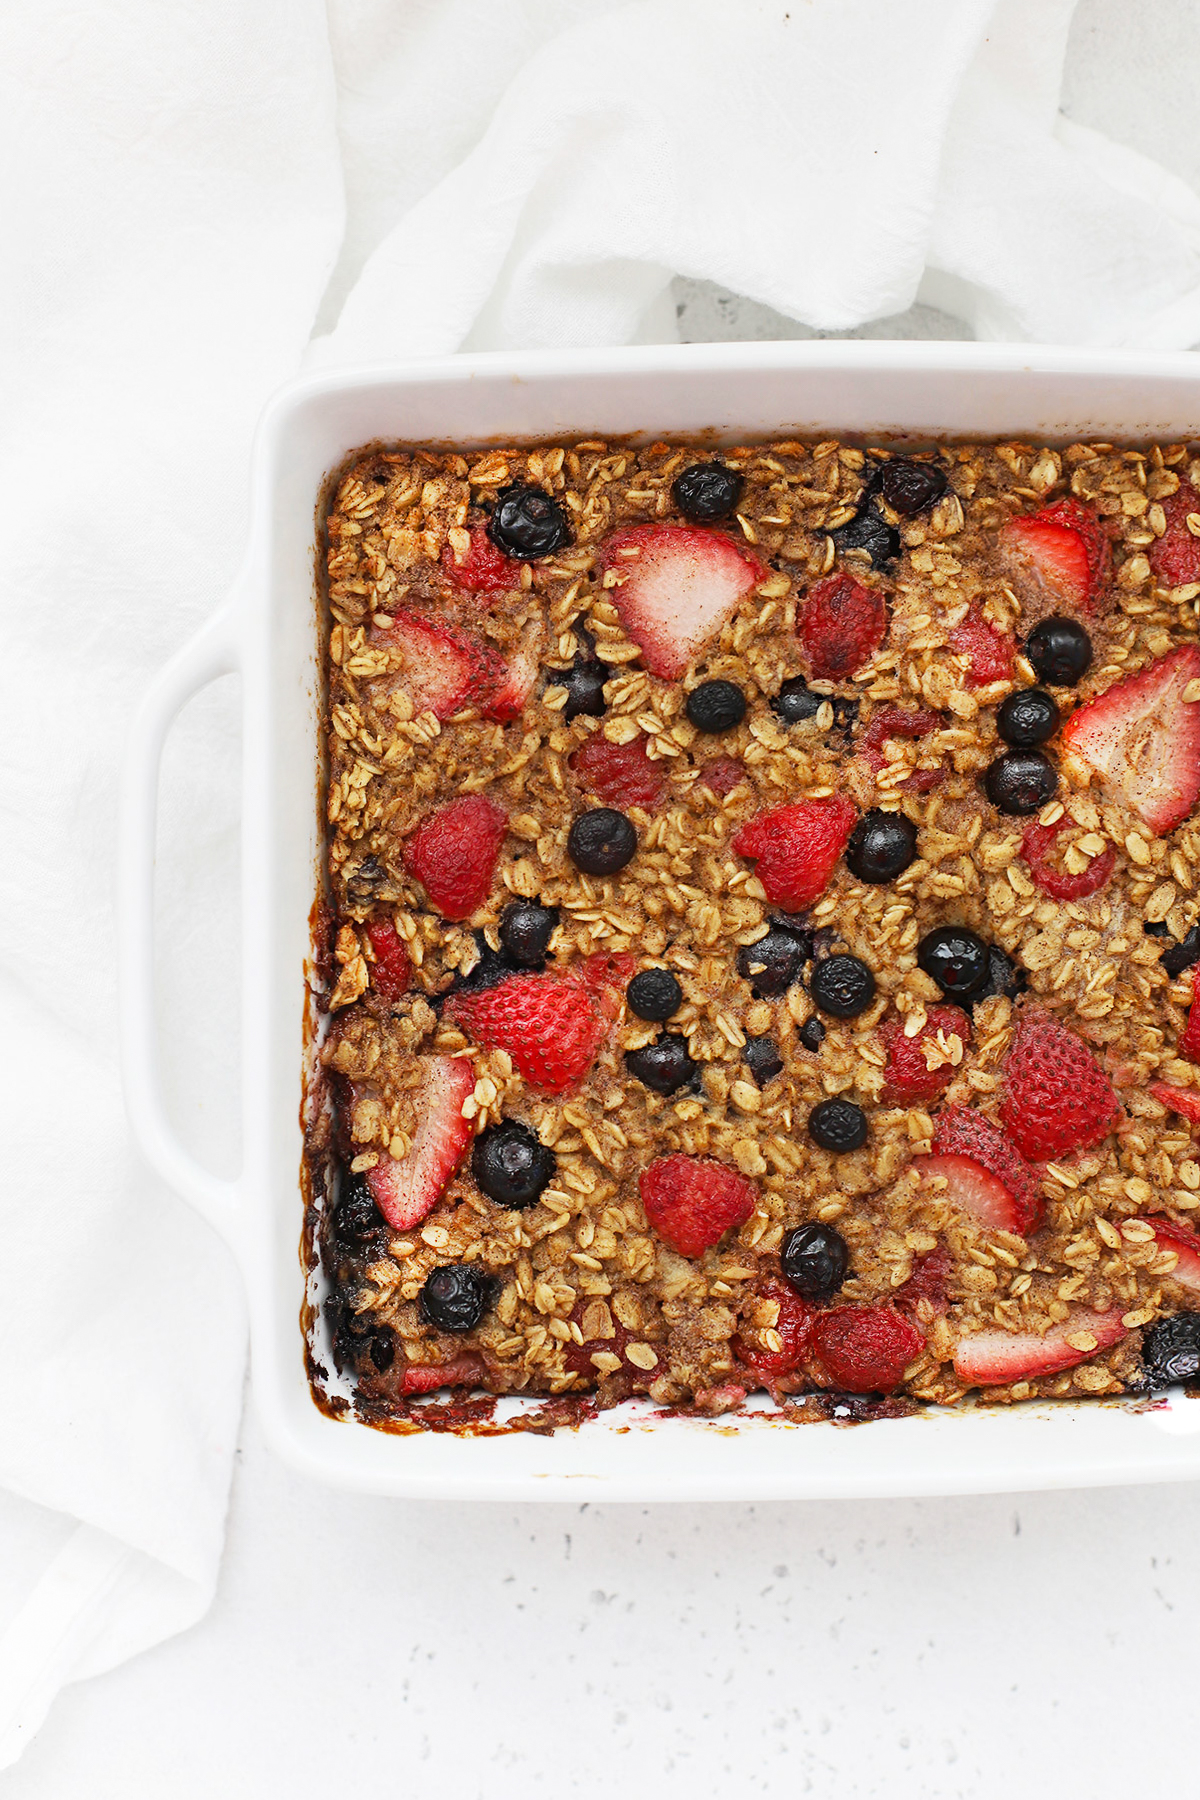 Overhead view of a pan of mixed berry baked oatmeal freshly removed from the oven